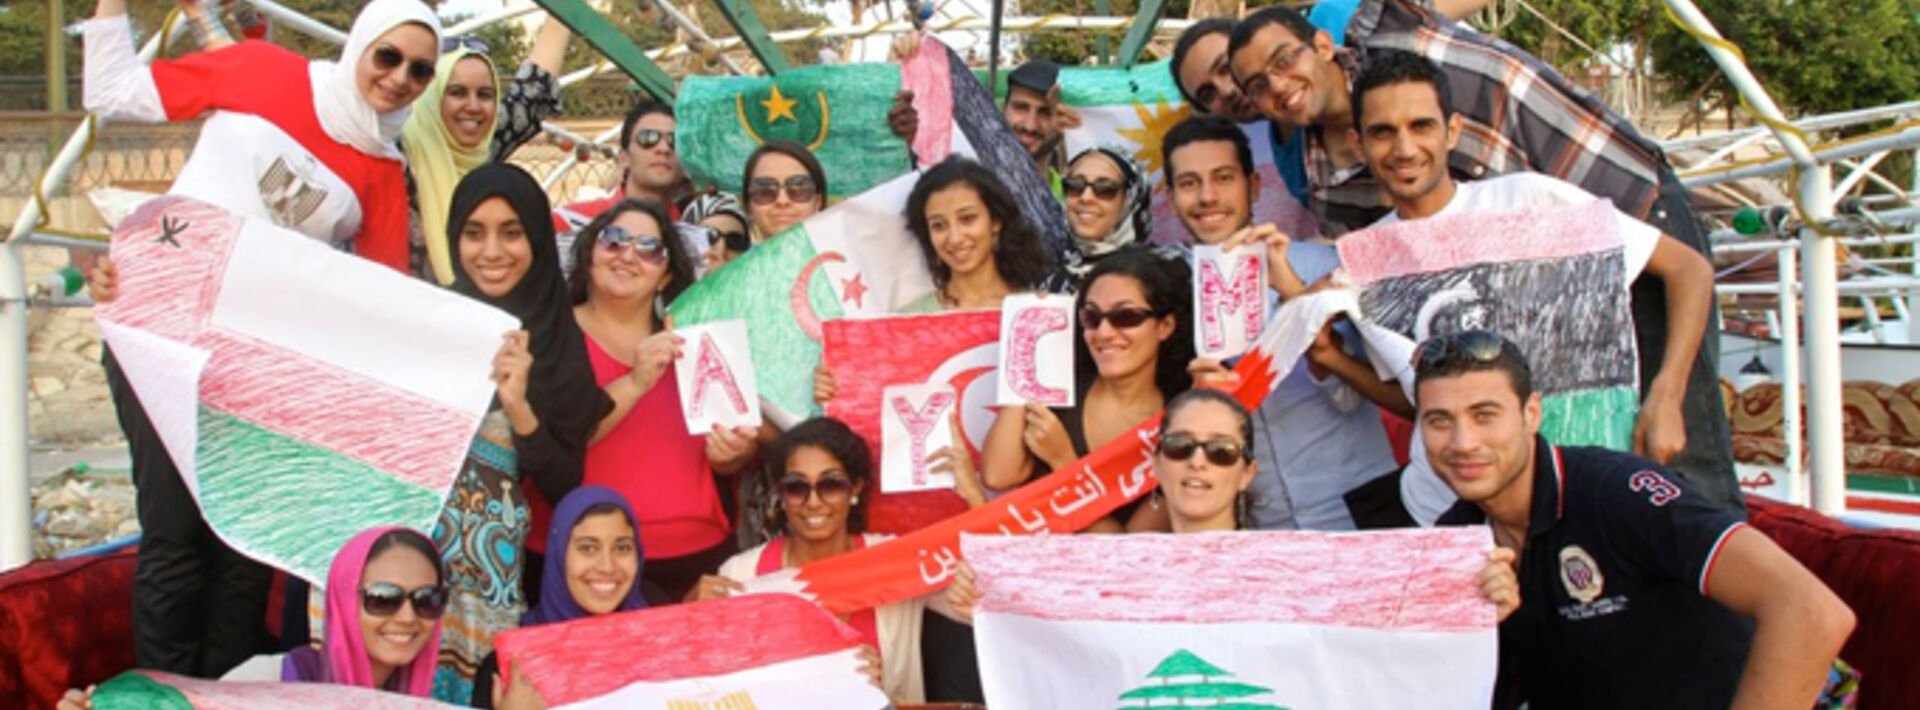 Arab Youth Climate Movement launches across more than a dozen countries